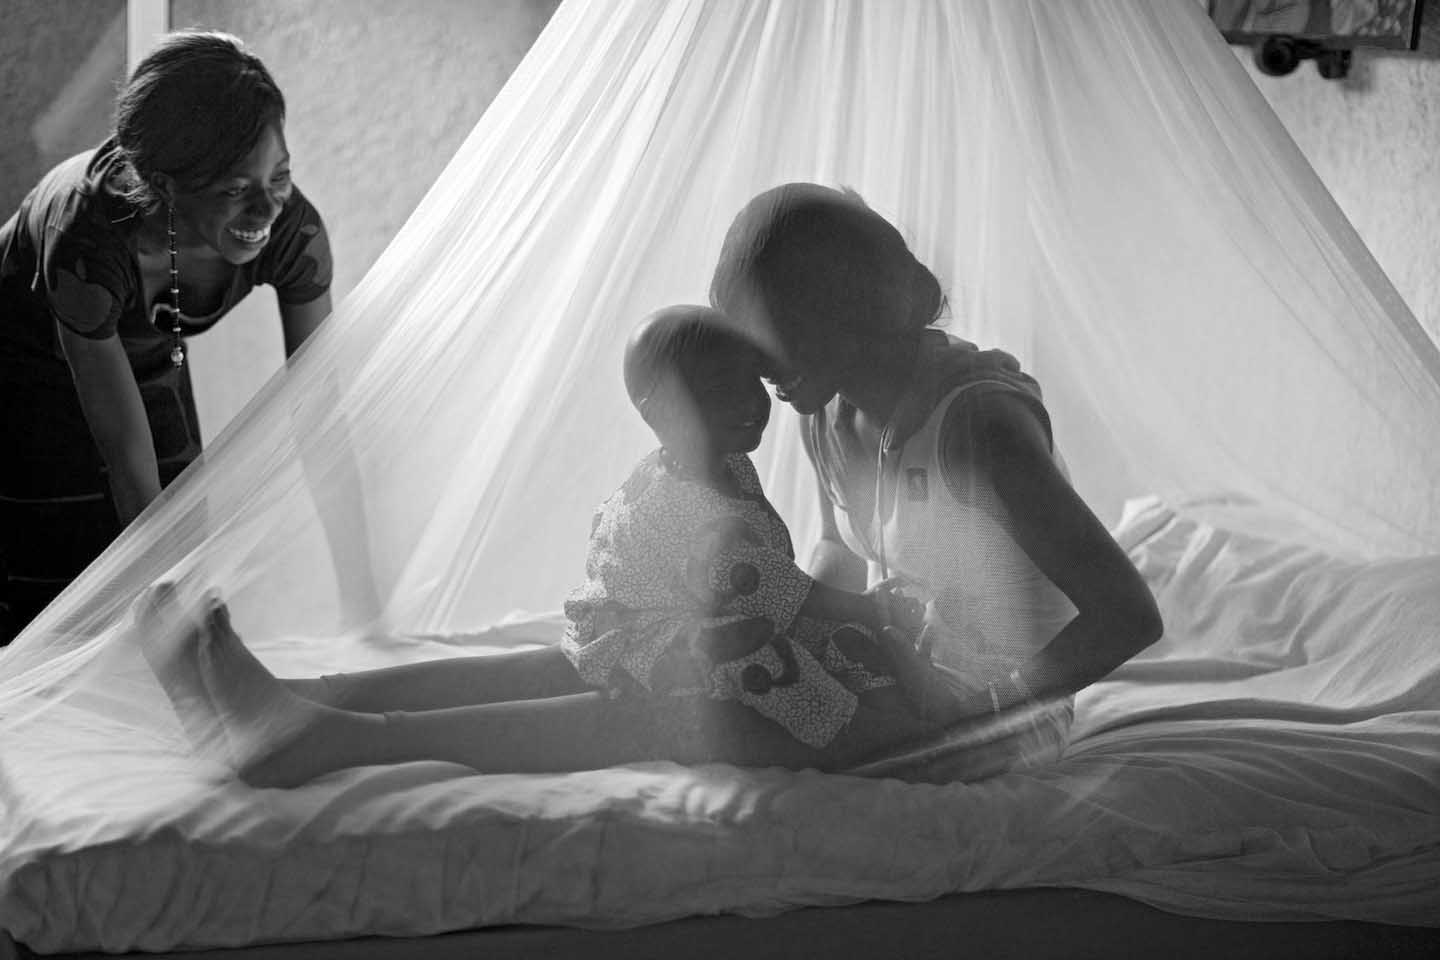 Eliminating Malaria with mosquito nets in Tanzania